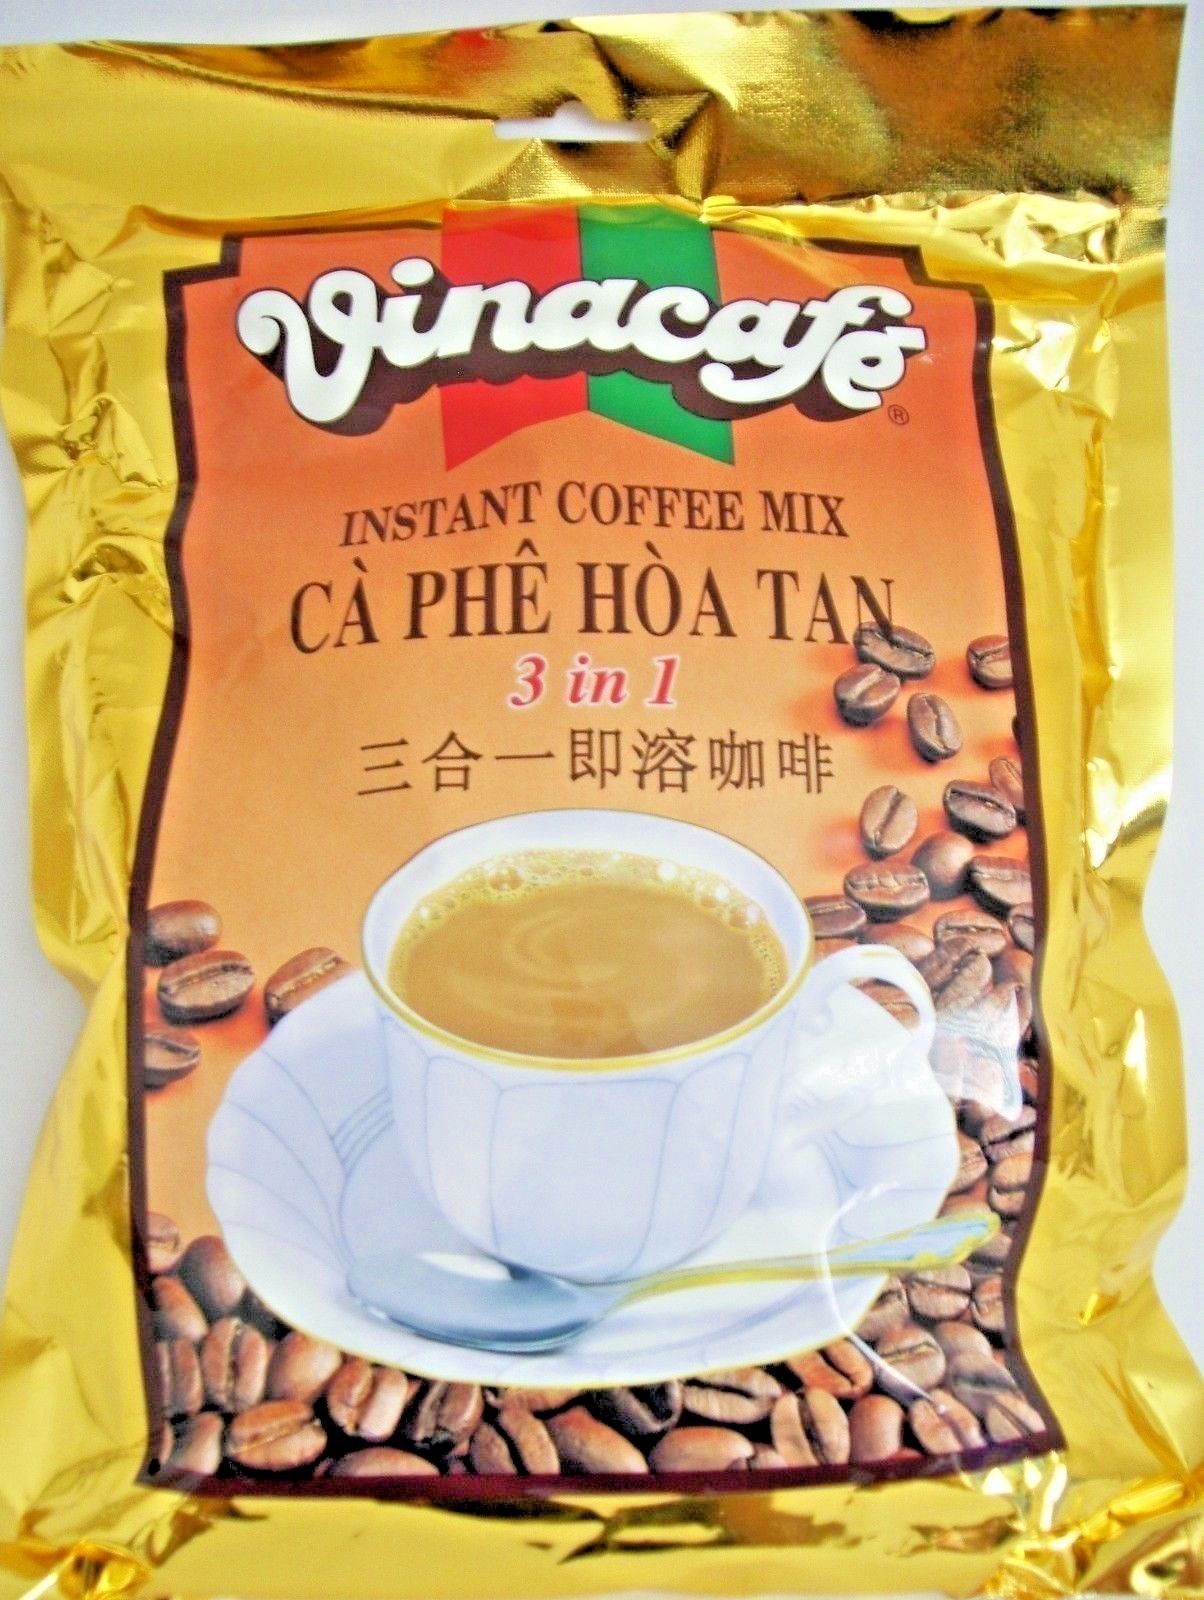 24 BAGS of VINACAFE MIX 3 IN 1 INSTANT COFFEE. Fast Shipping - $138.59